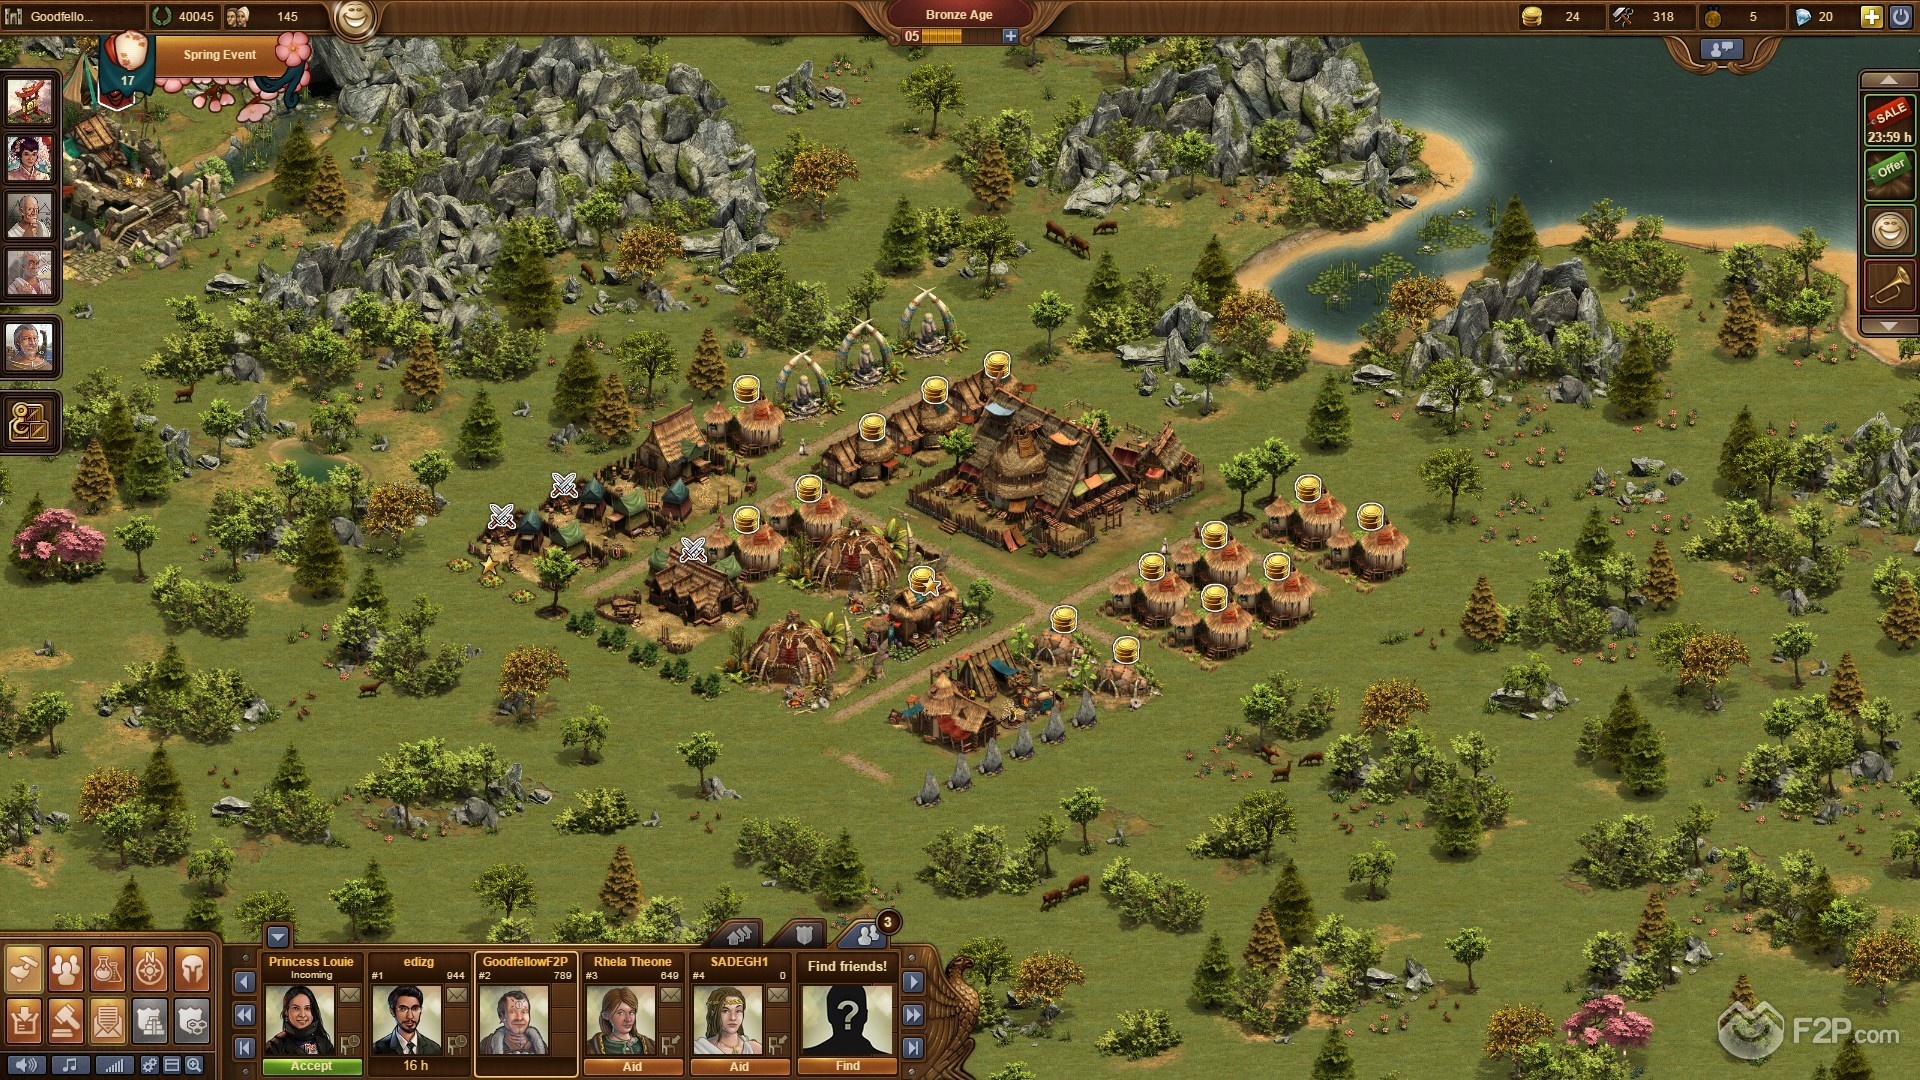 Forge-of-Empires-screenshots-review-f2p-4.jpg